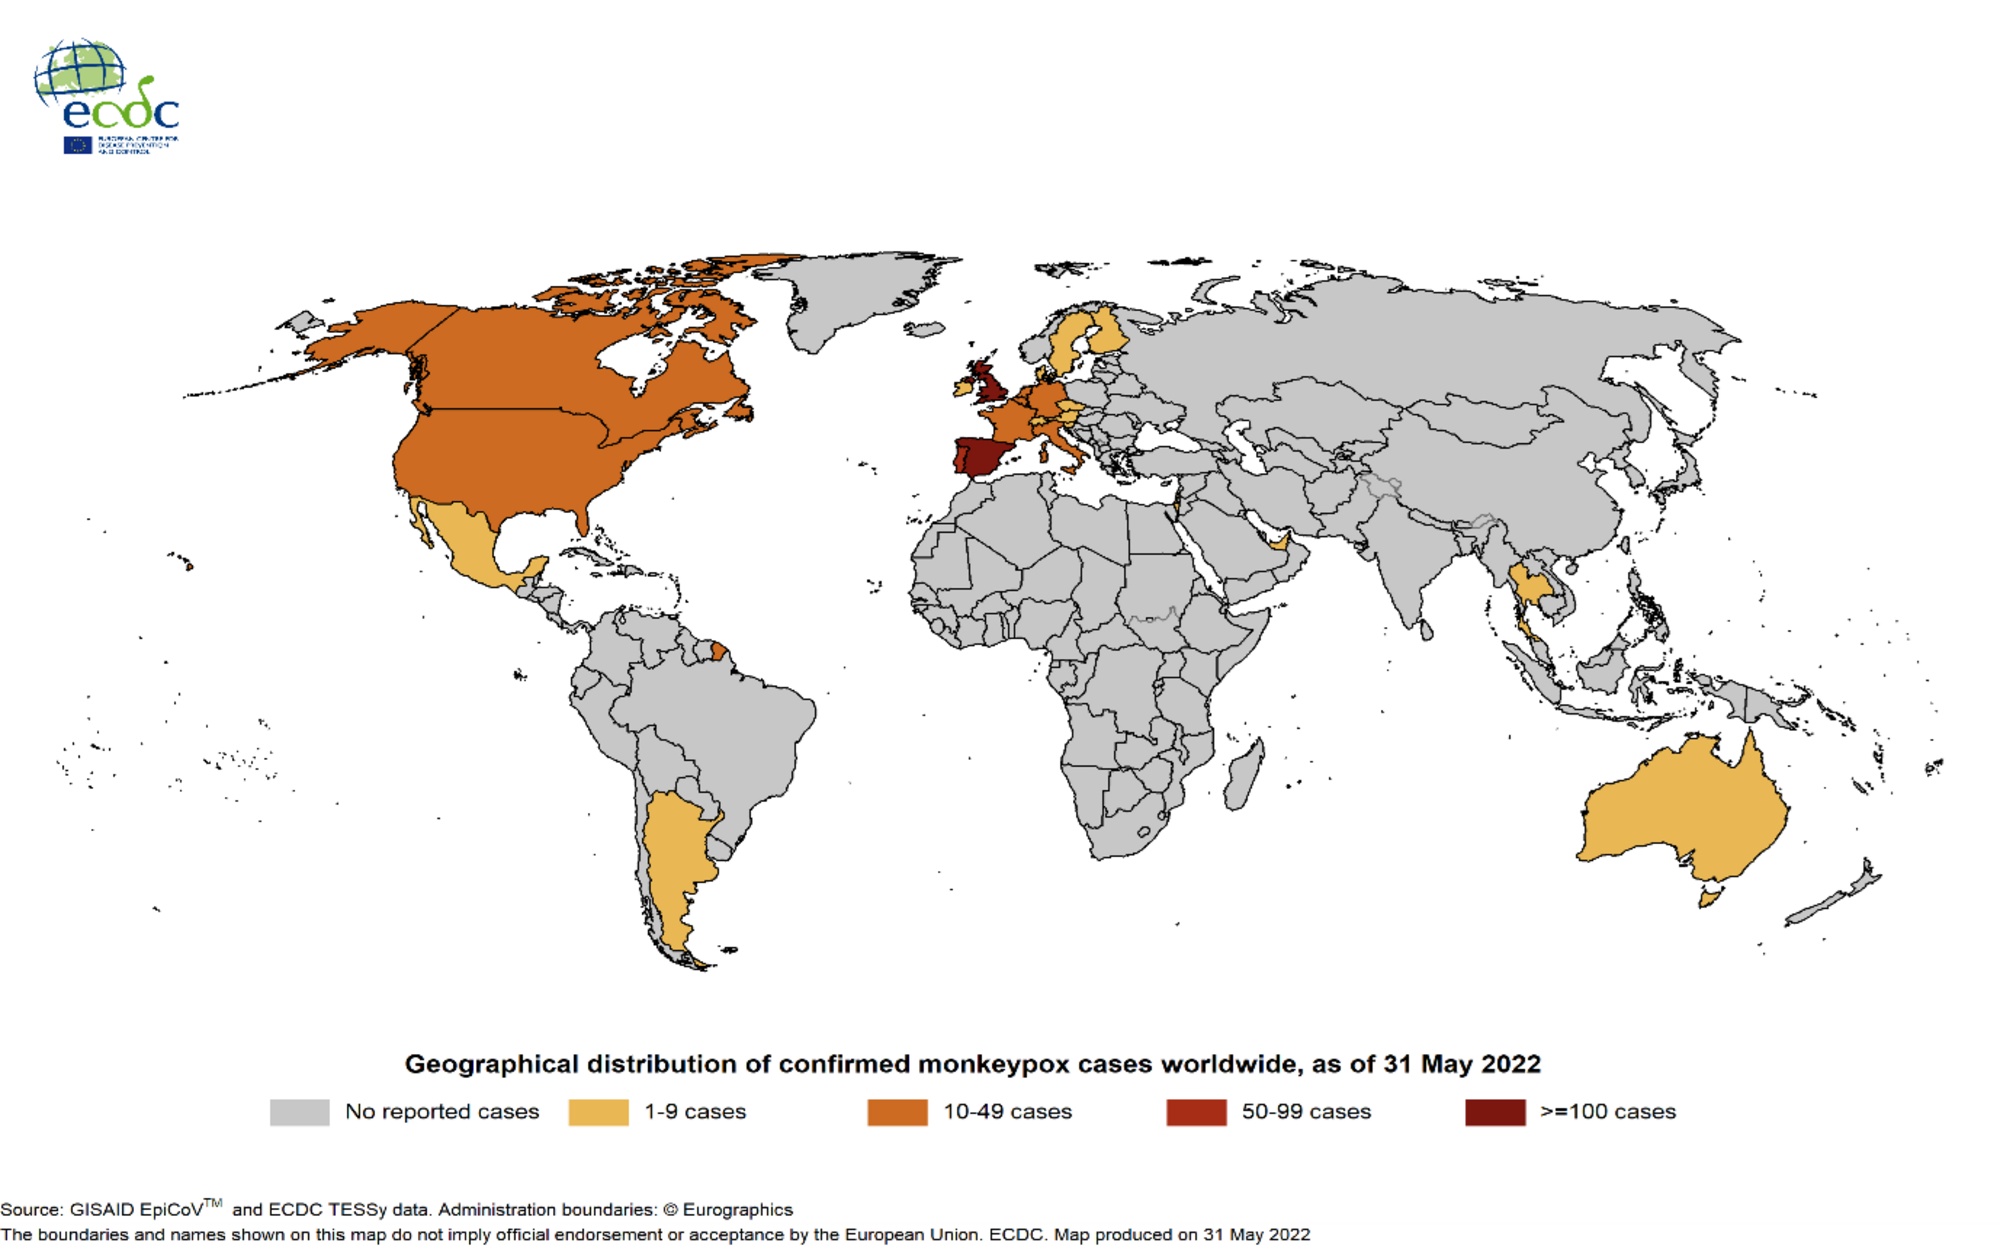 Geographical distribution of confirmed cases confirmed cases of monkeypox worldwide, as of May 31st 2022